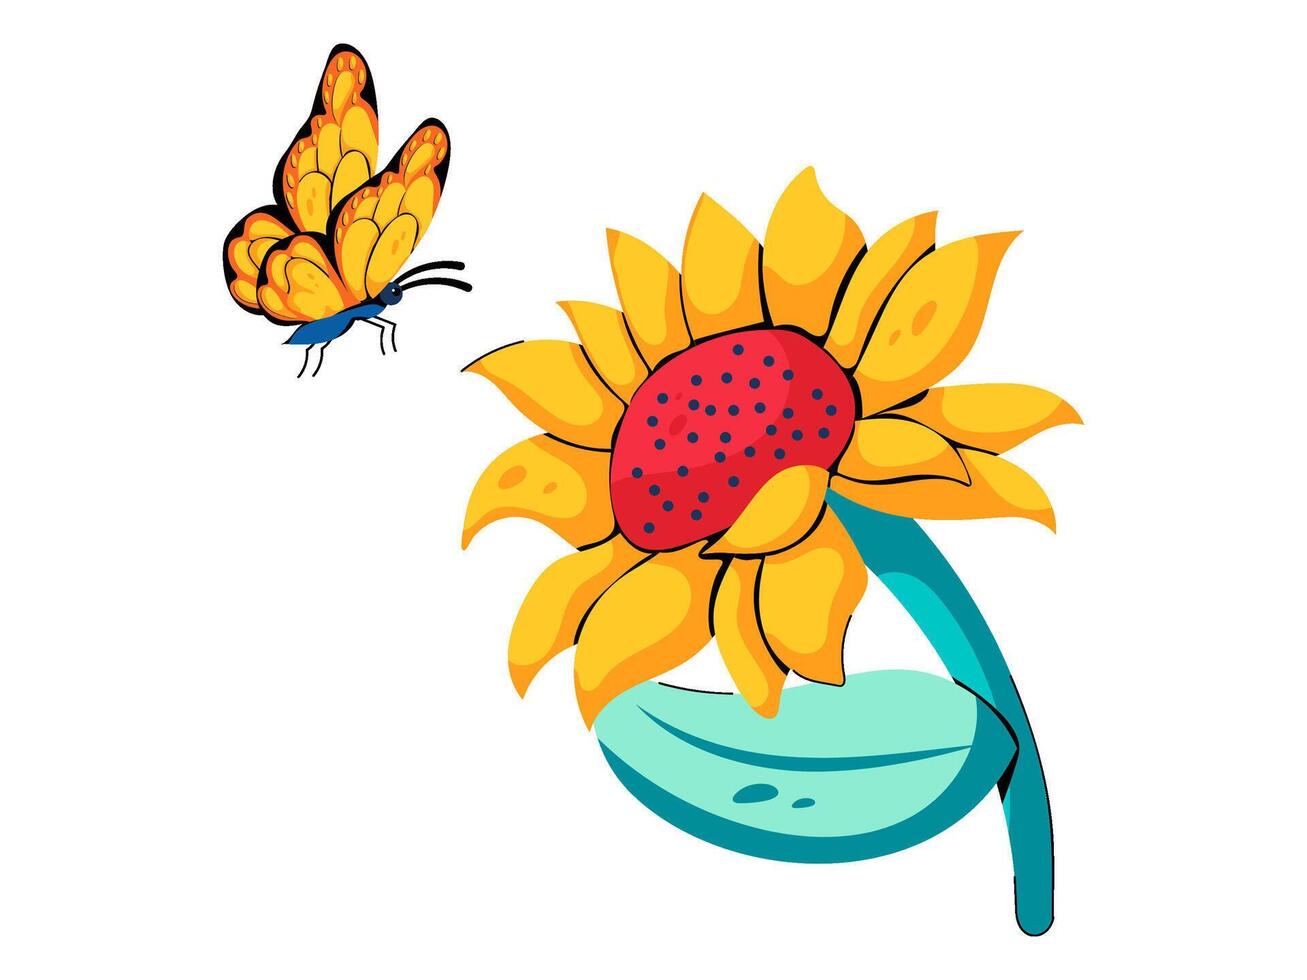 bee and the flower design with modern illustration concept style for badge farm agriculture sticker illustration vector